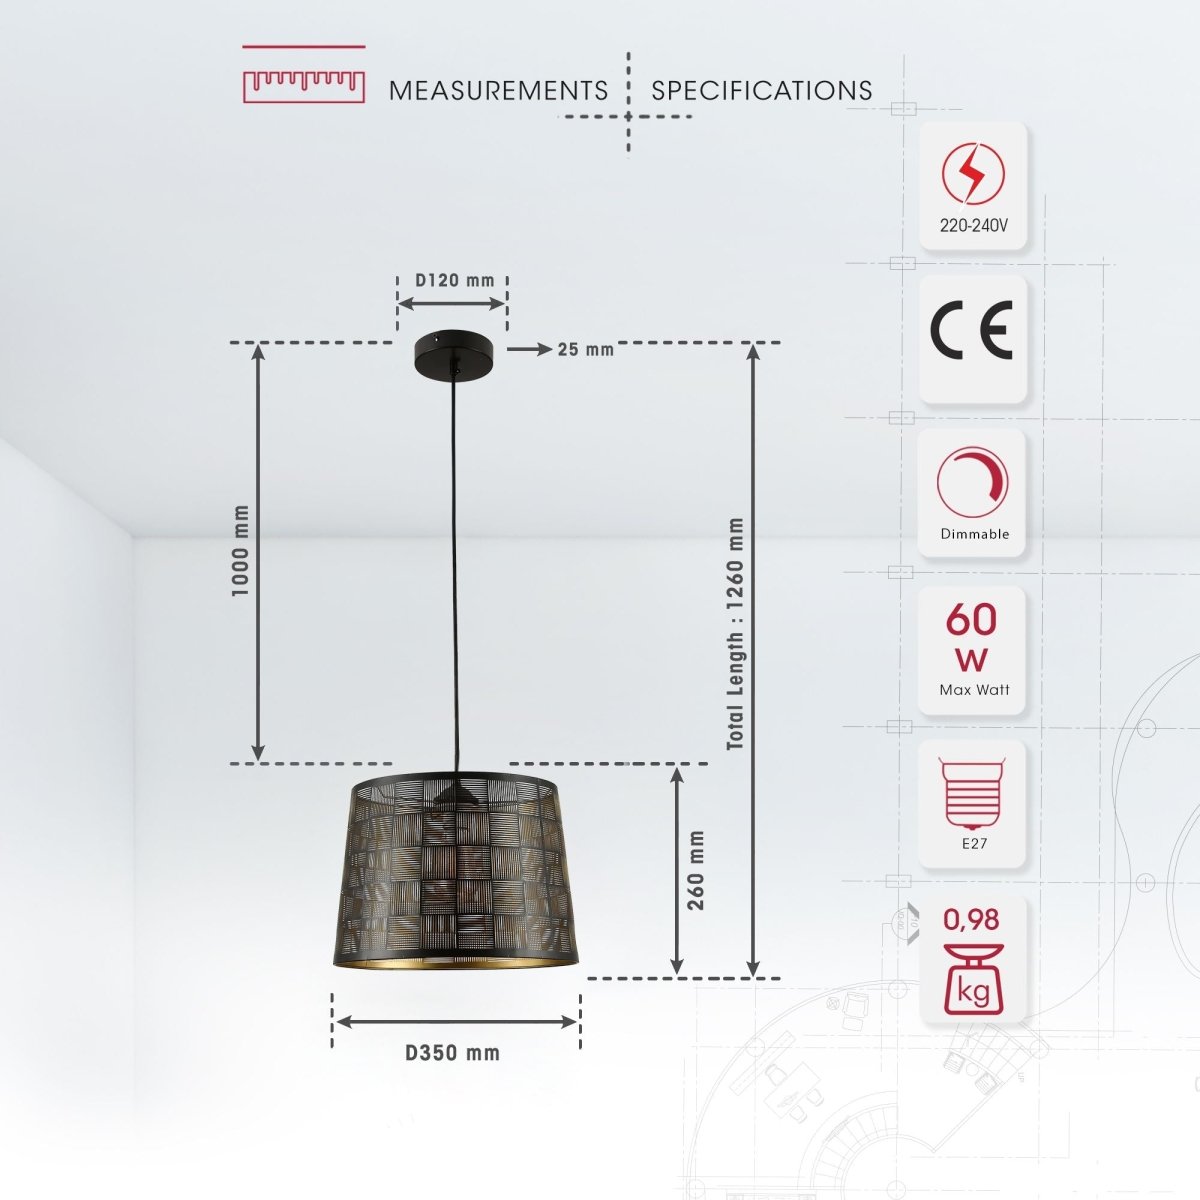 Product dimensions of black-golden metal frustum pendant light square pattern with e27 fitting